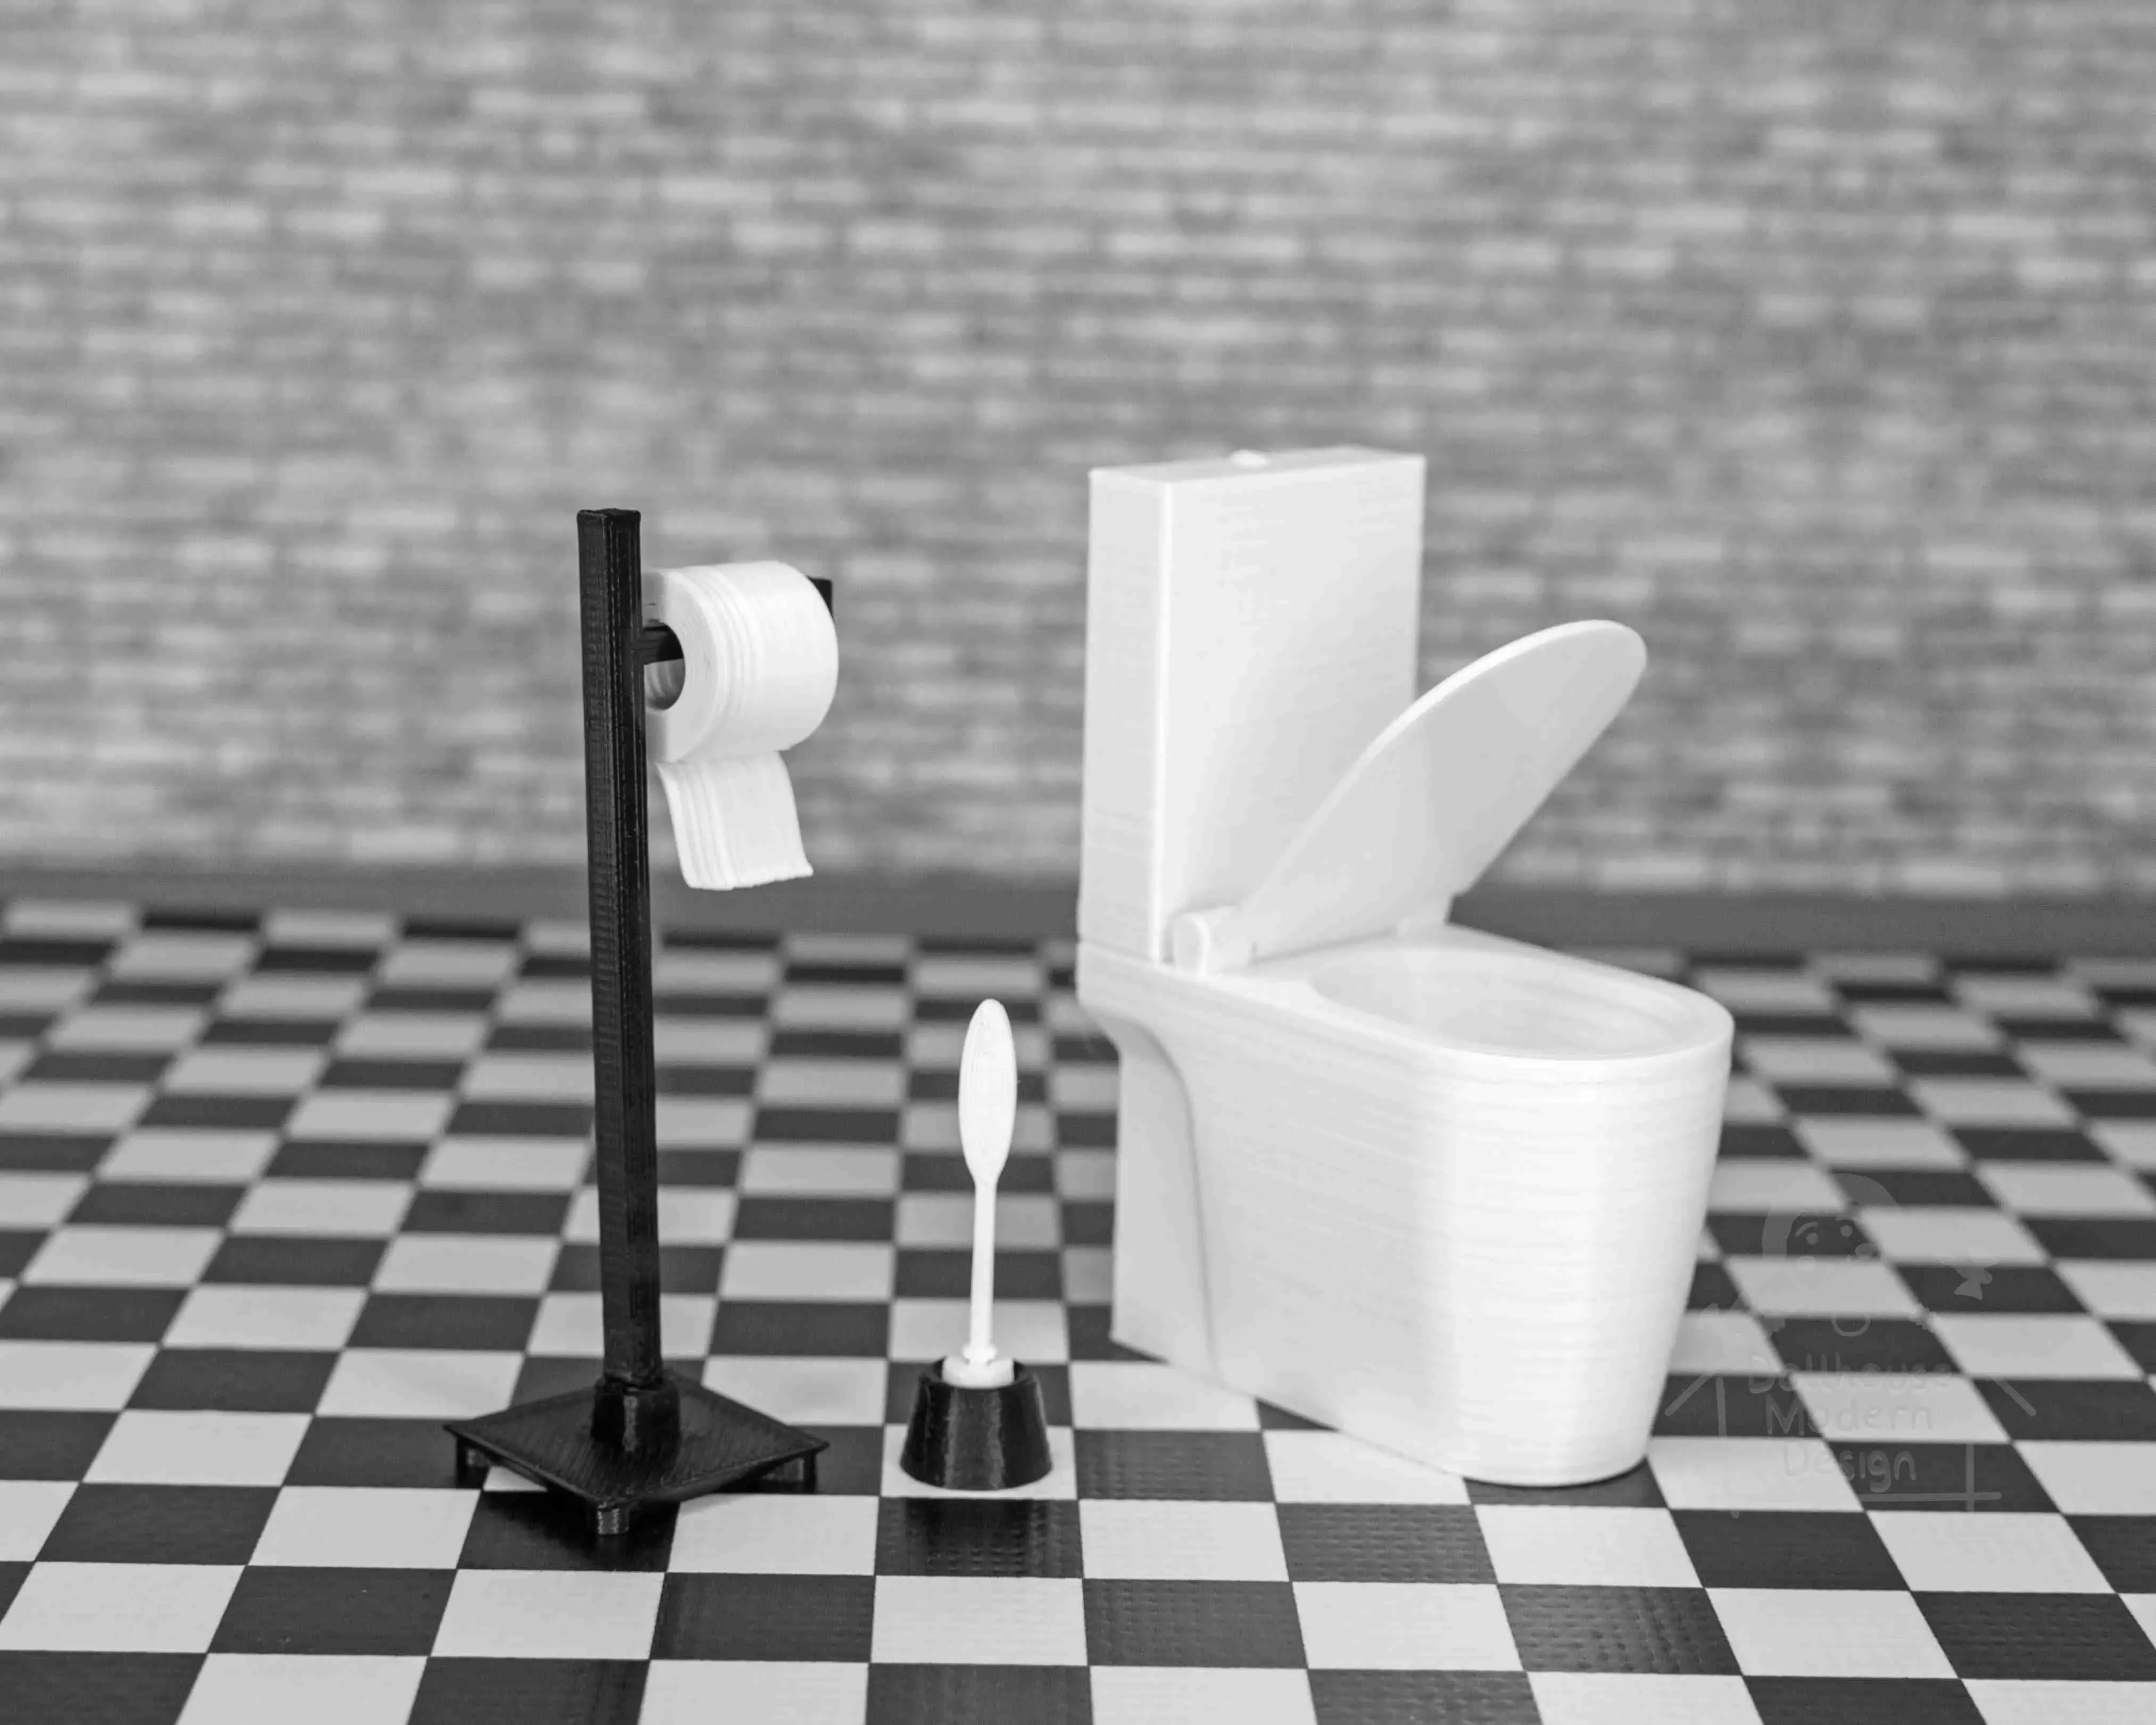 Freestanding Toilet Paper Holder & Roll 1:12 Scale